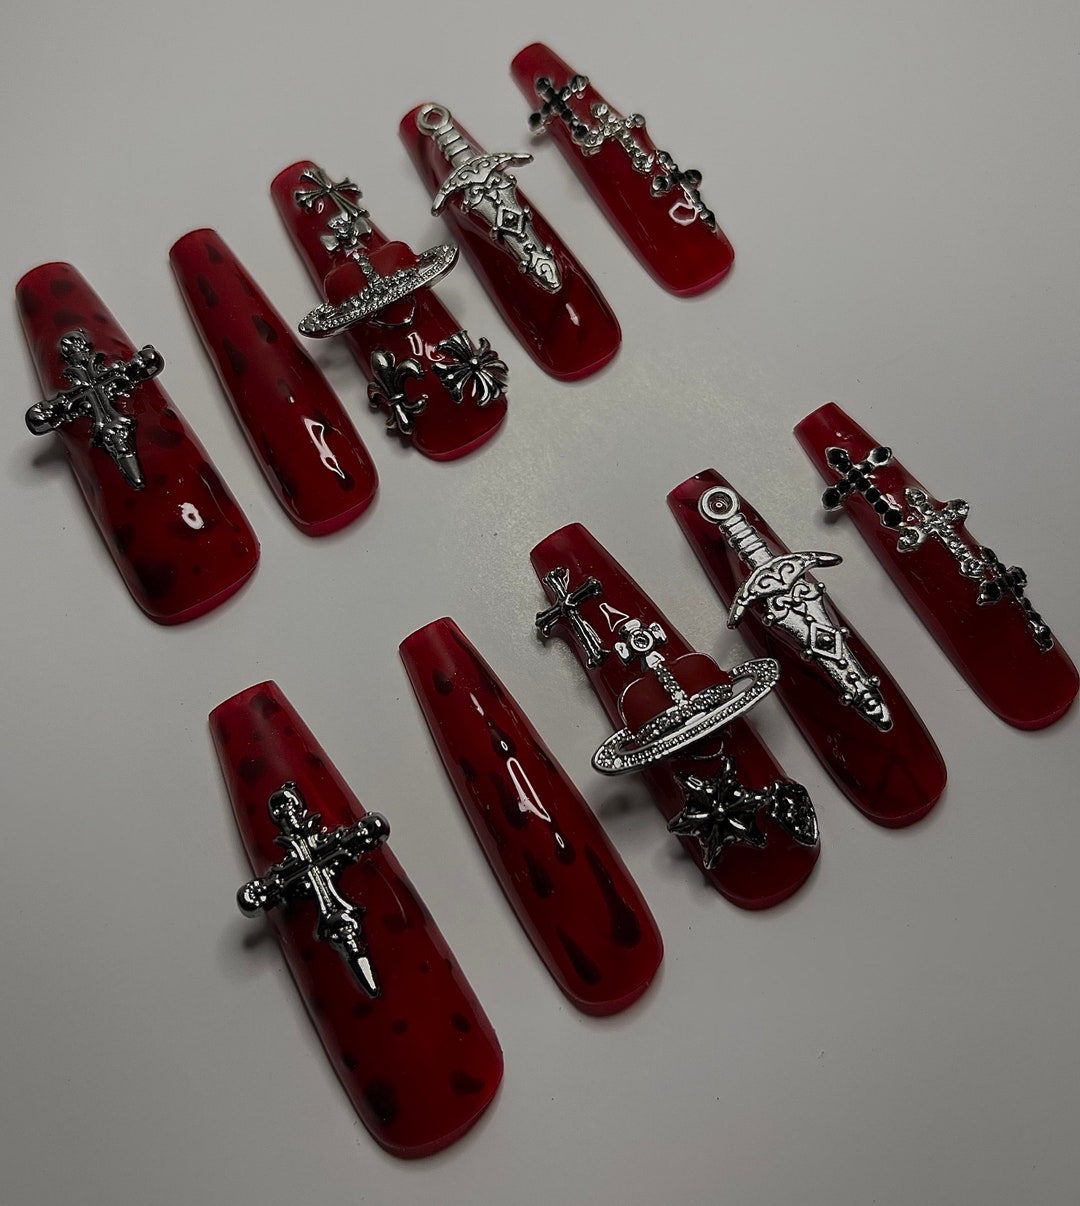 Vampiric Red Gothic Mixed Match Press on Nails - Etsy